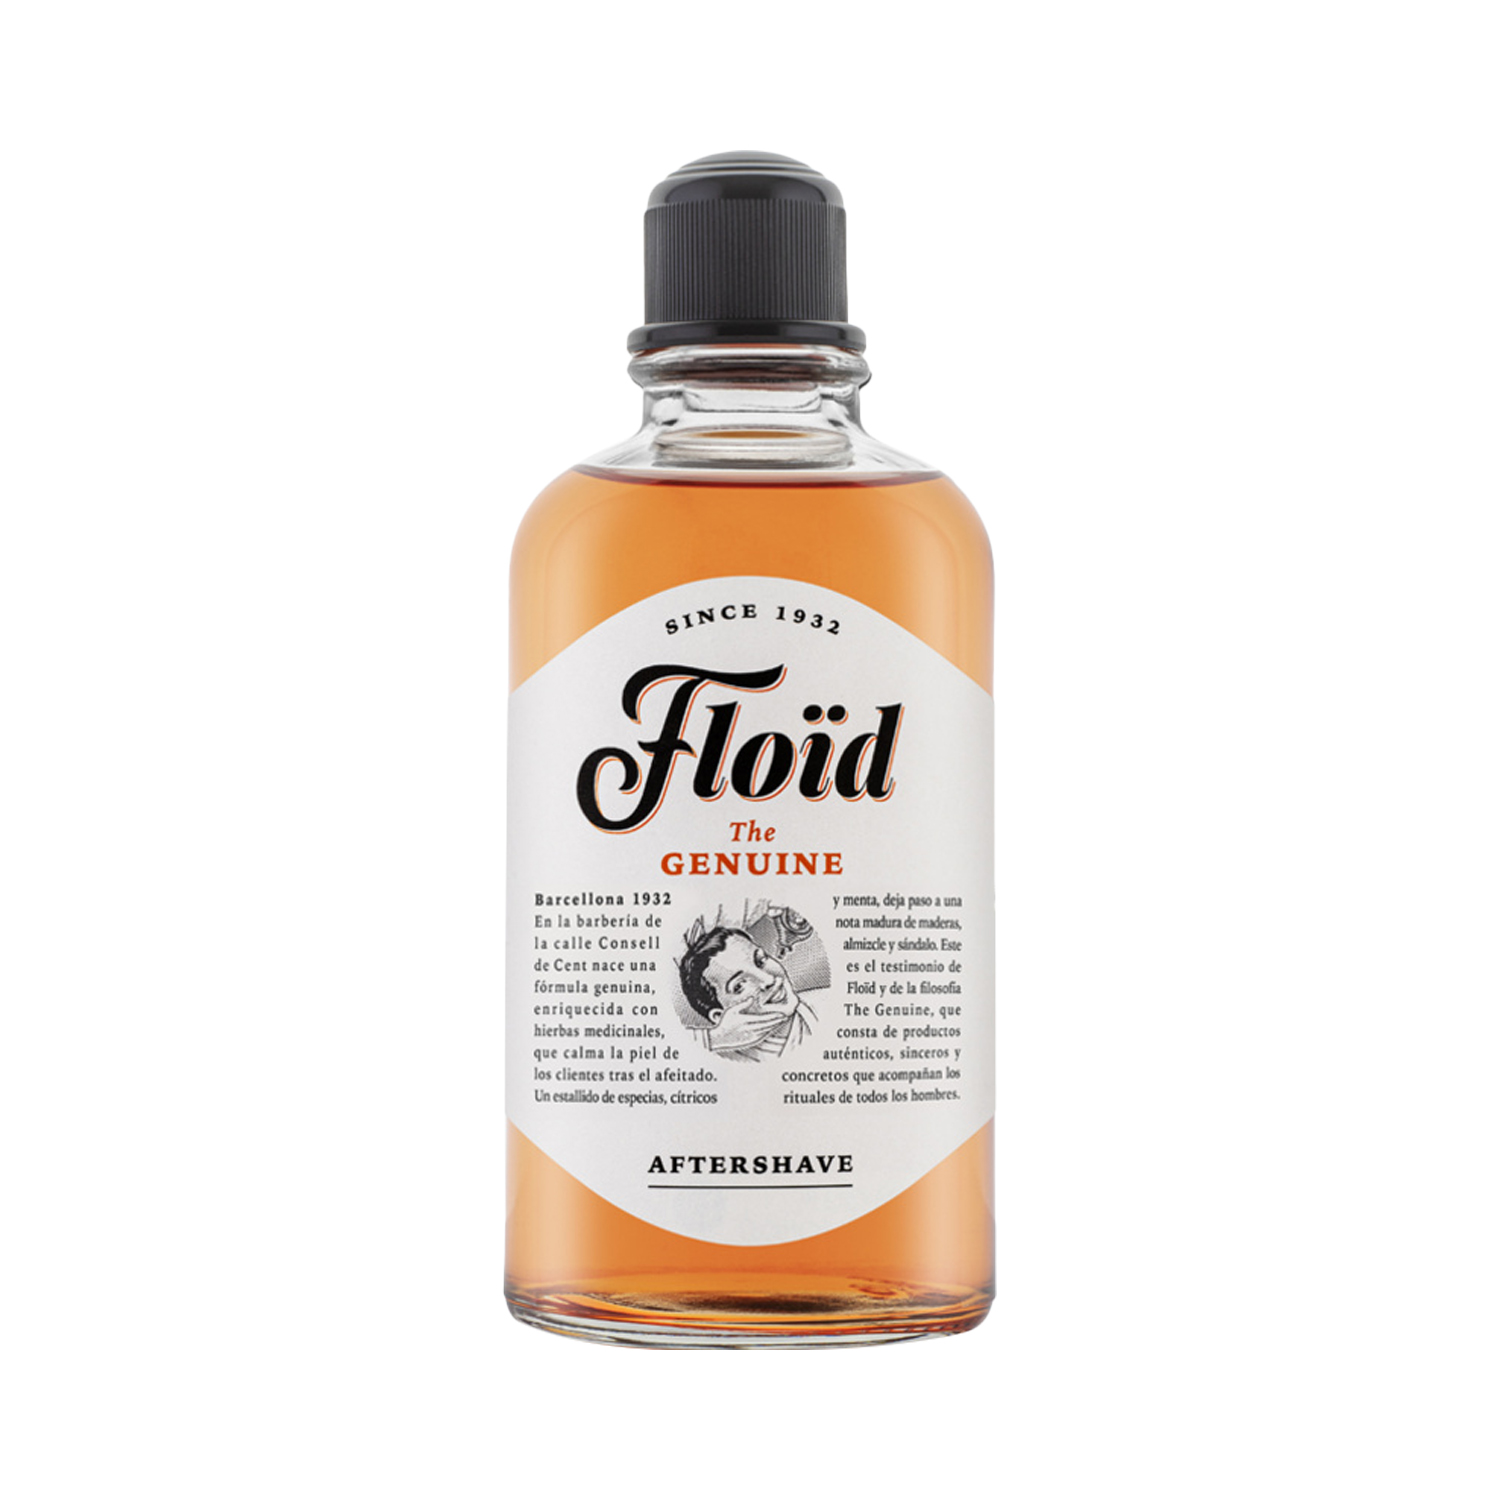 Floid - Genuine After Shave Vigorous - After Shave